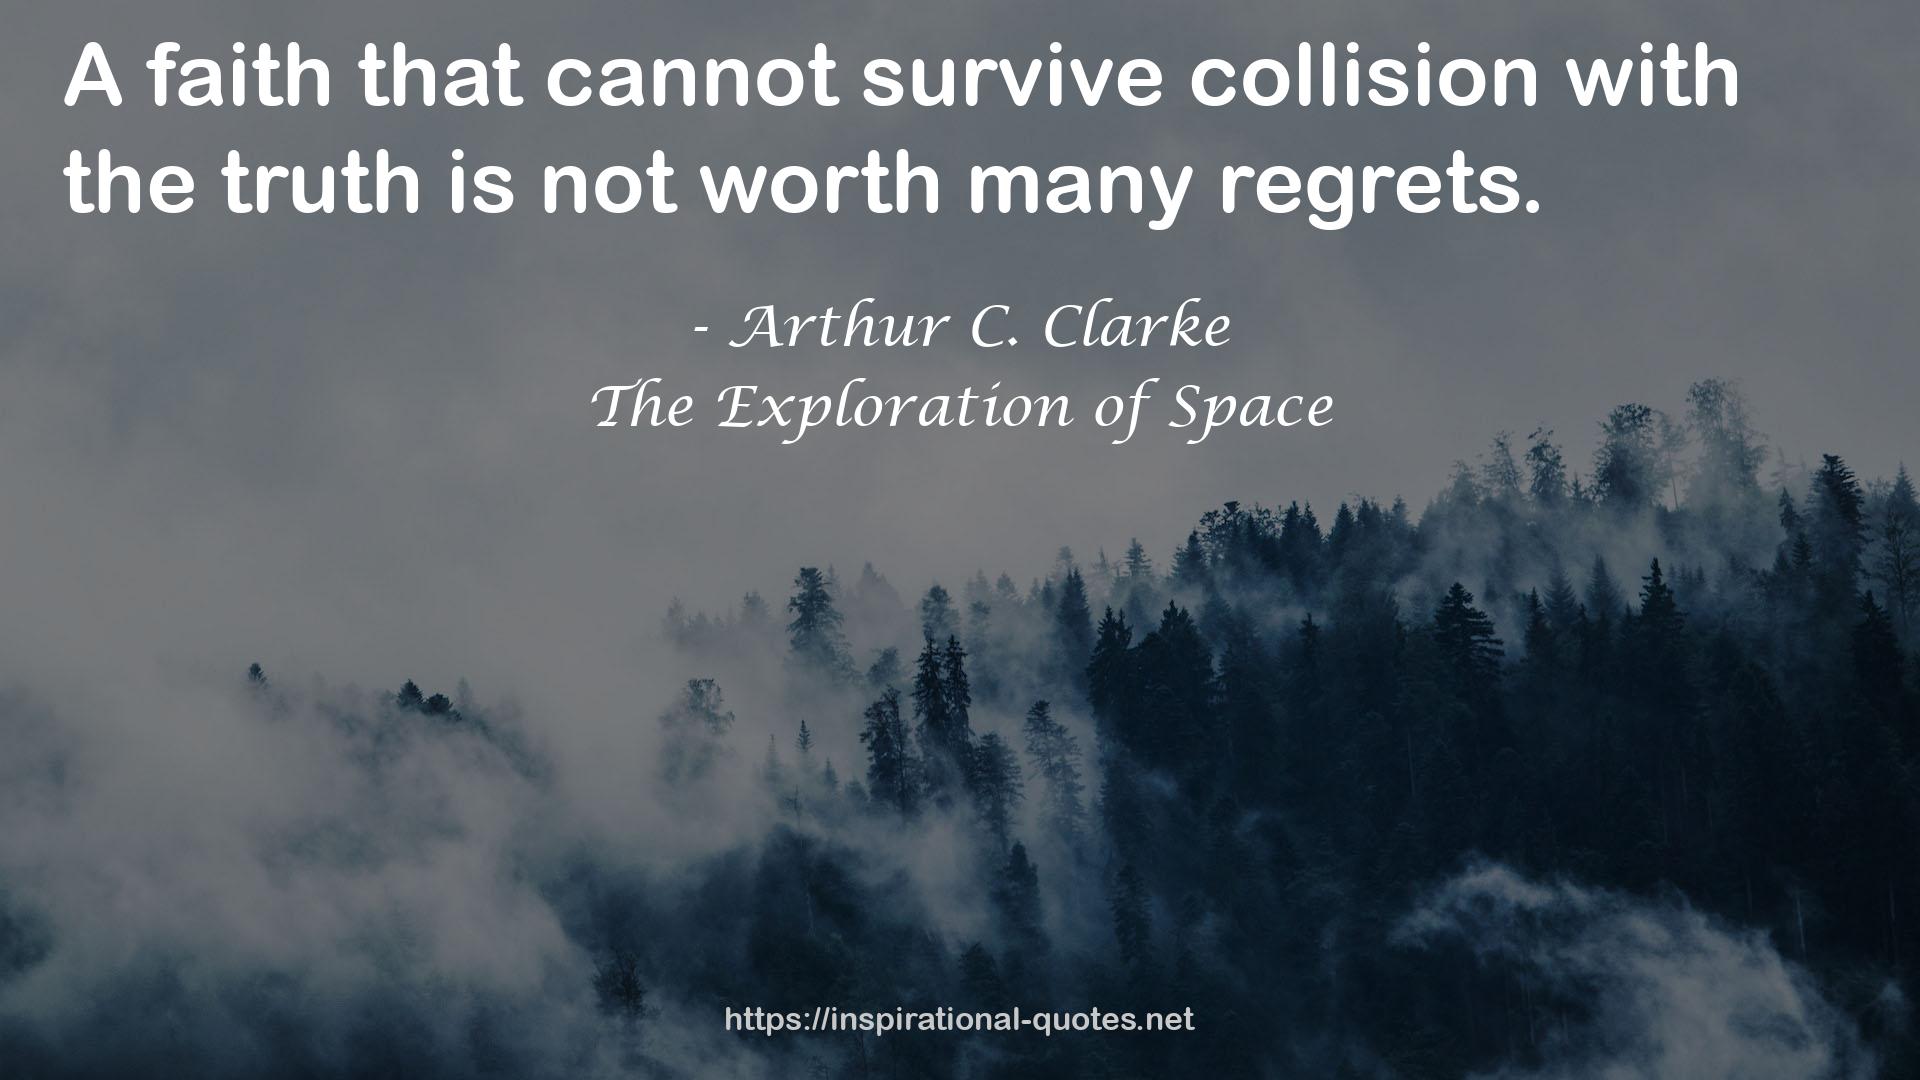 The Exploration of Space QUOTES